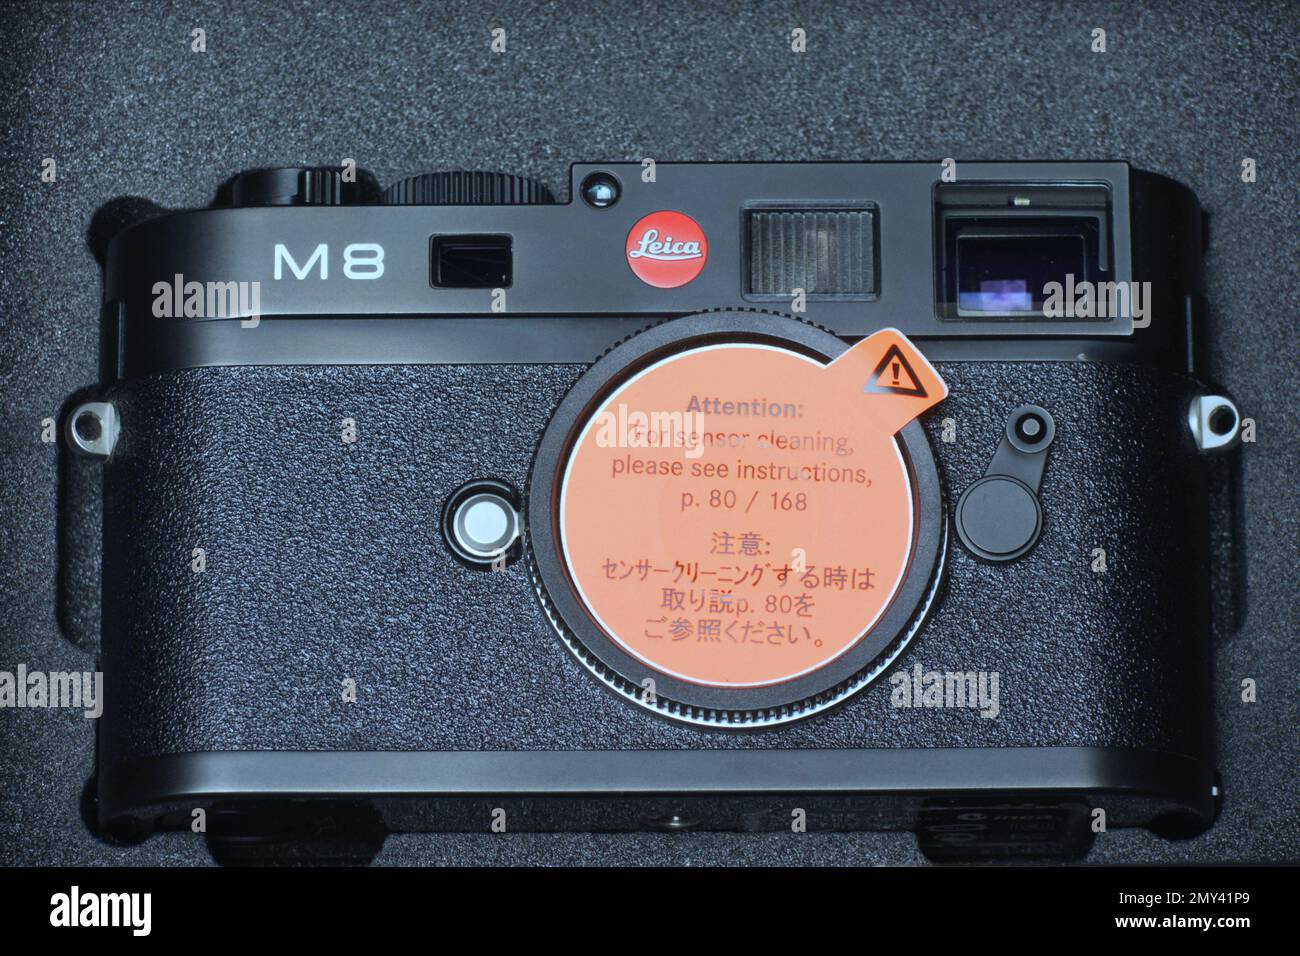 LEICA M8 - FIRST DIGITAL RANGEFINDER MADE BY LEICA WITH A 10,3 MPIX KODAK CCD  LAUNCHED IN 2006 - LEICA CAMERA - LEICA M © photography F.BEAUMONT Stock Photo